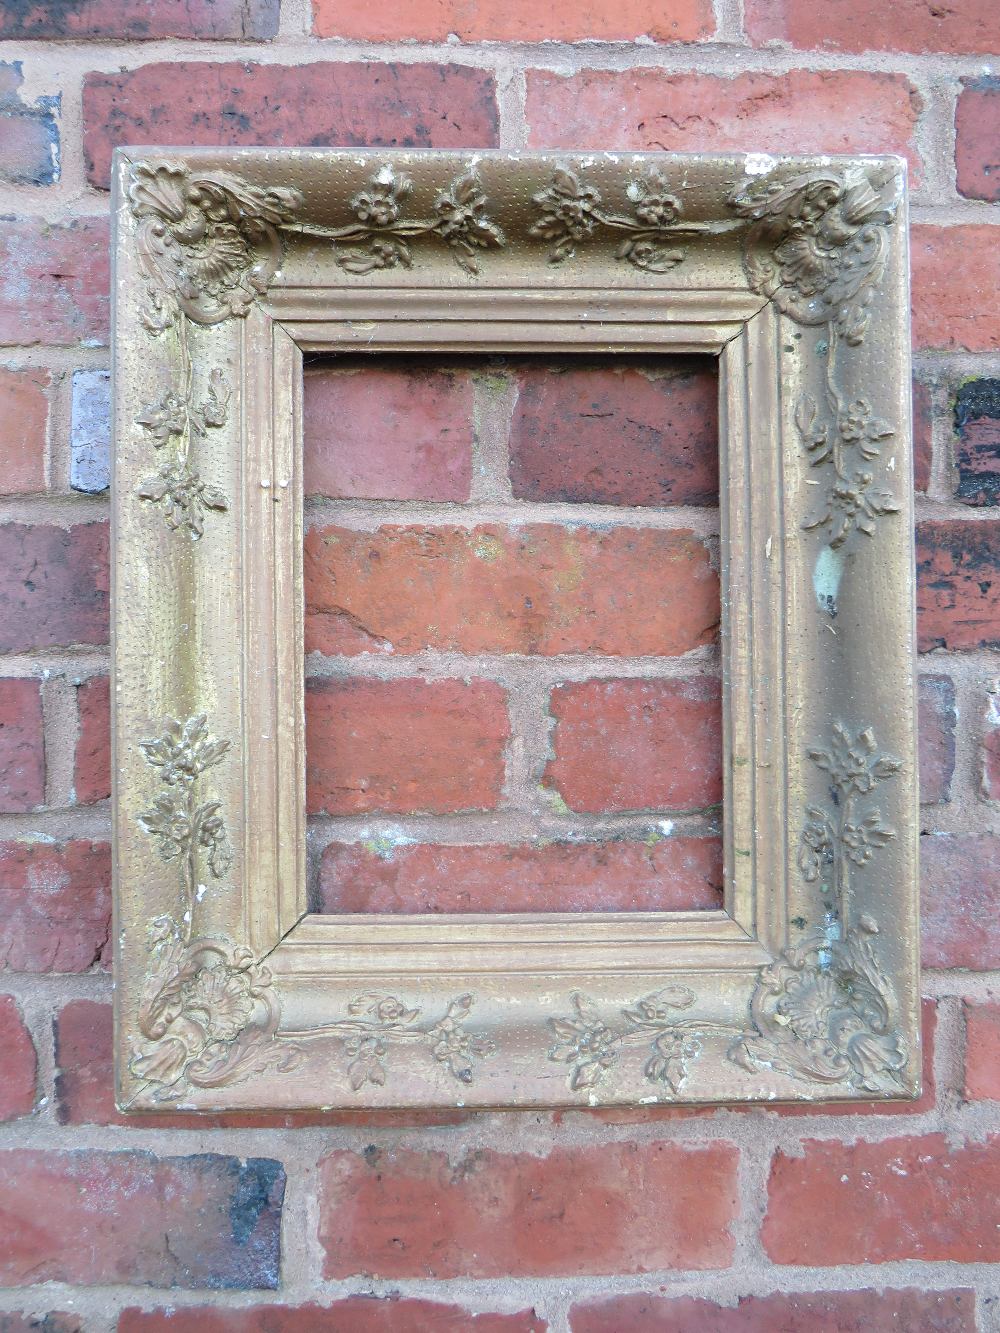 AN 18TH CENTURY DECORATIVE GOLD FRAME IN NEED OF SOME RESTORATION, frame W 9 cm, rebate 23 x 31 cm